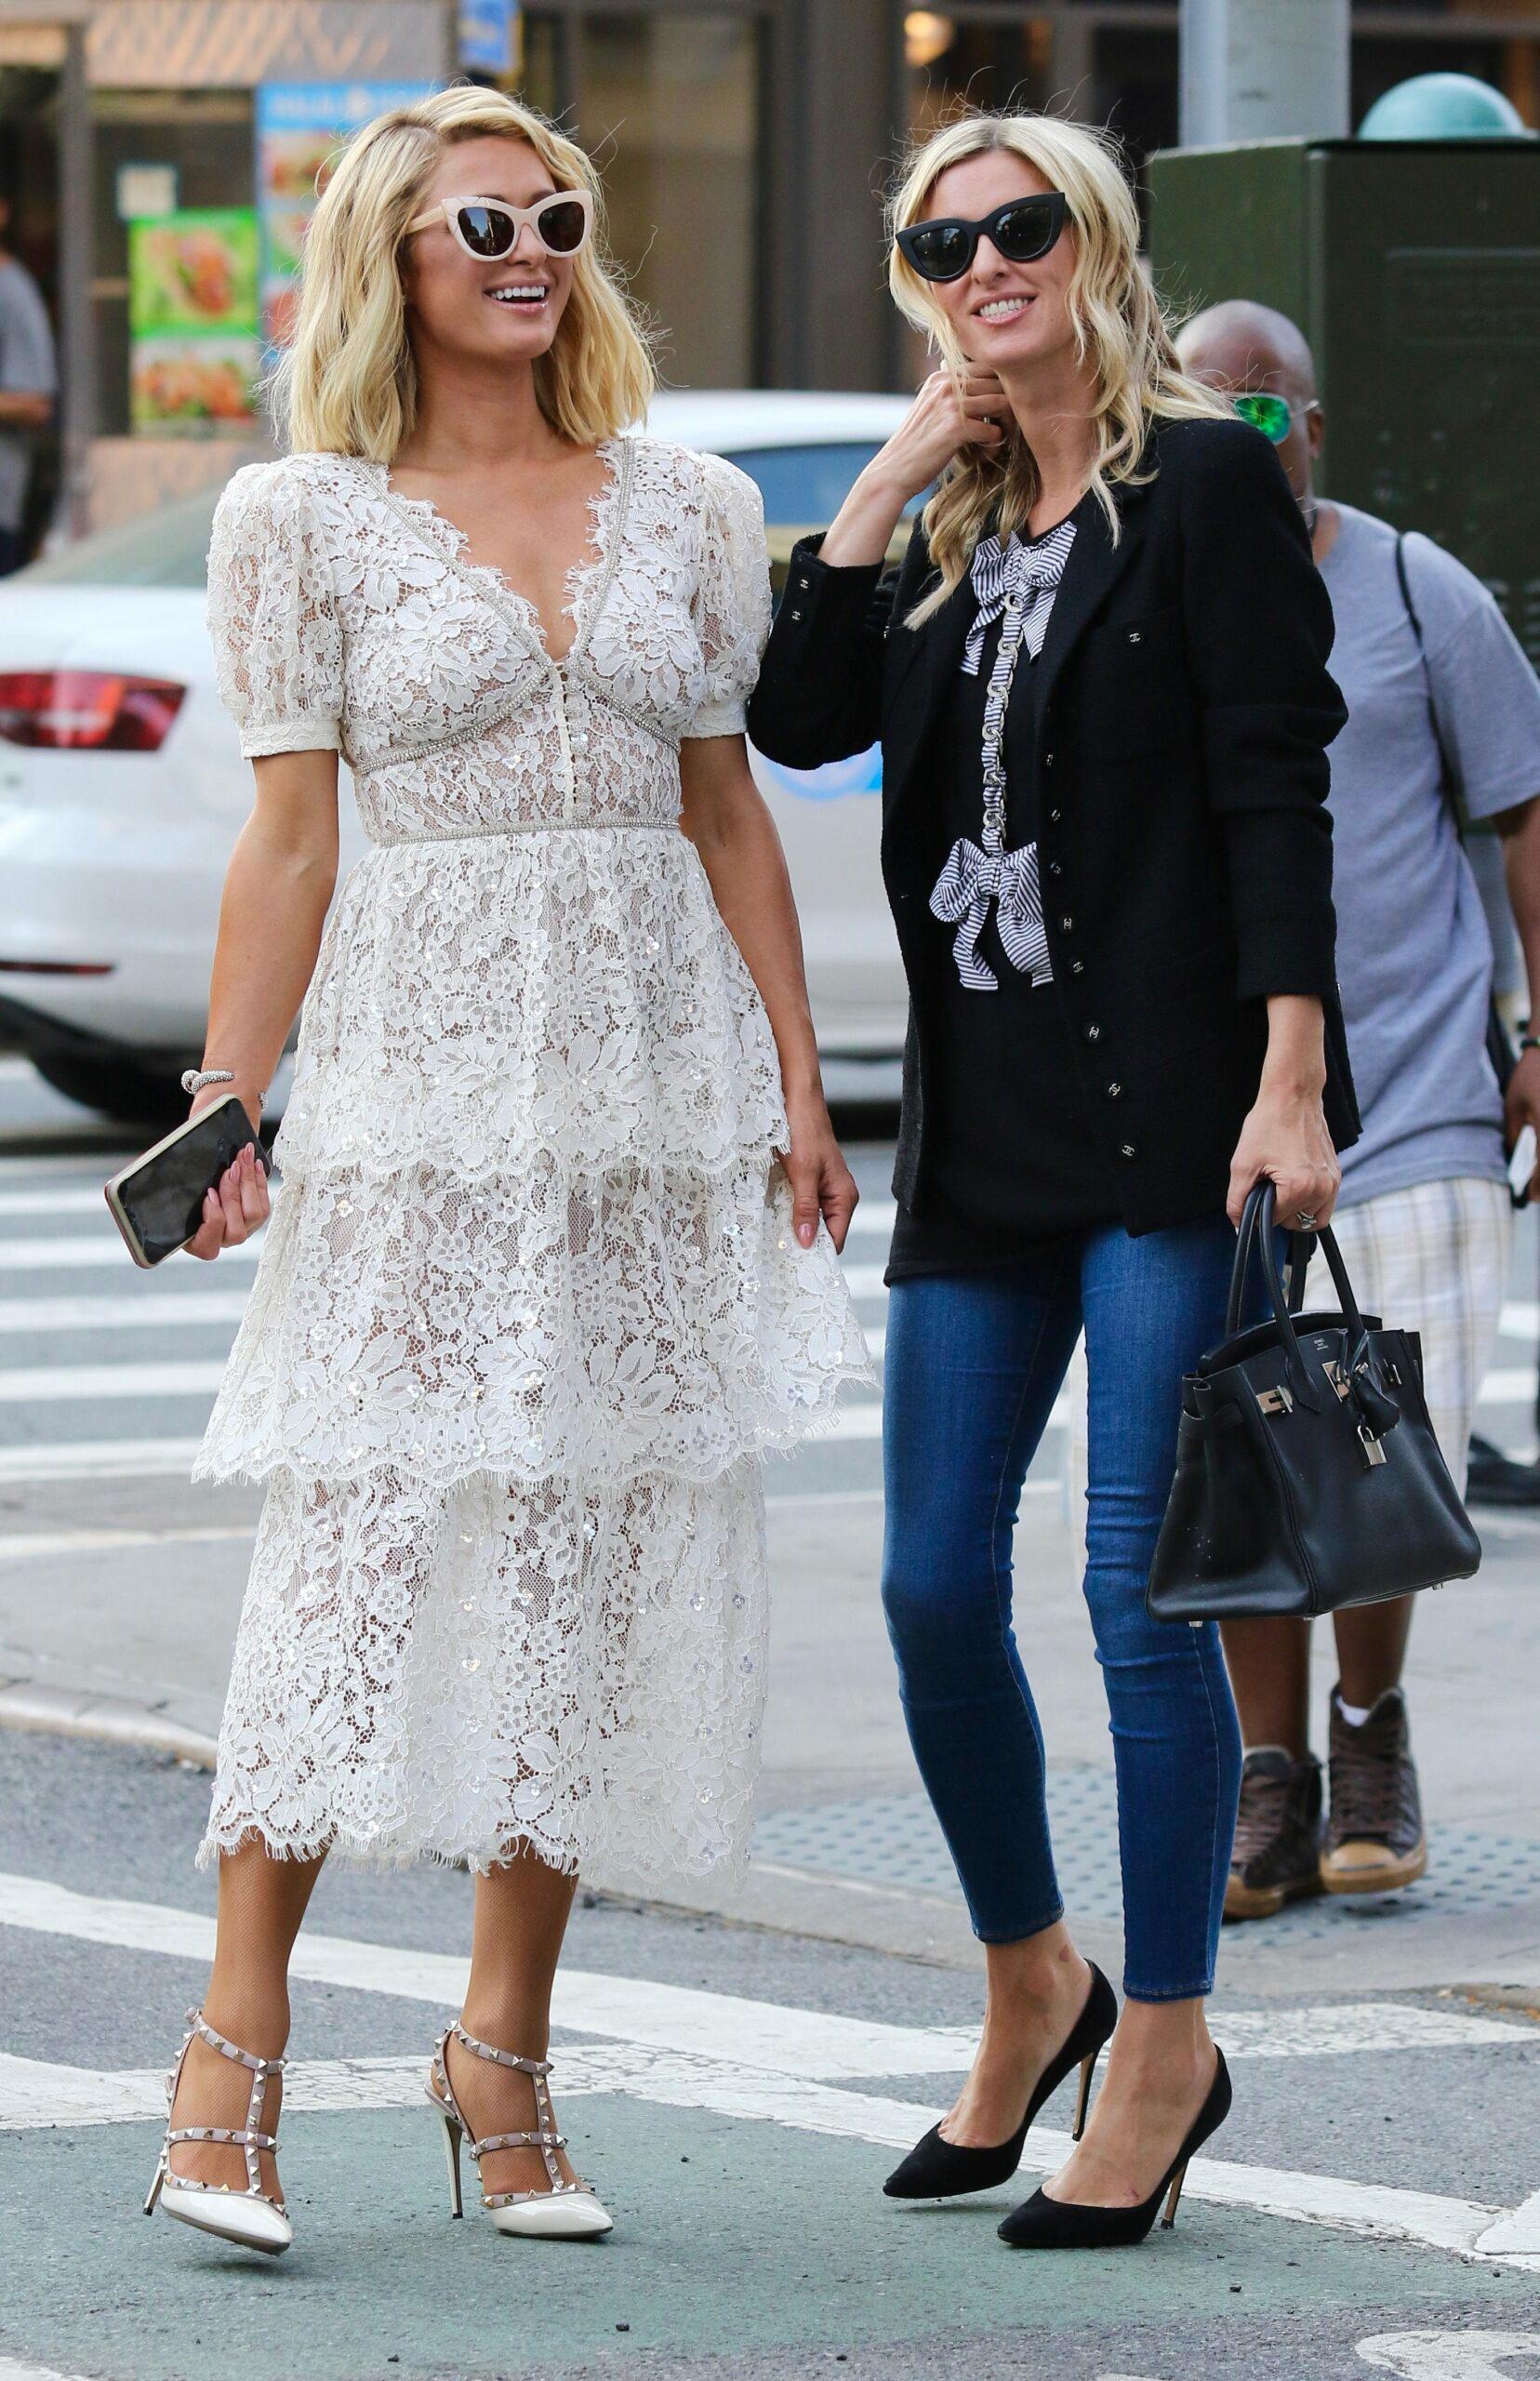 Paris and Nicky Hilton in NYC